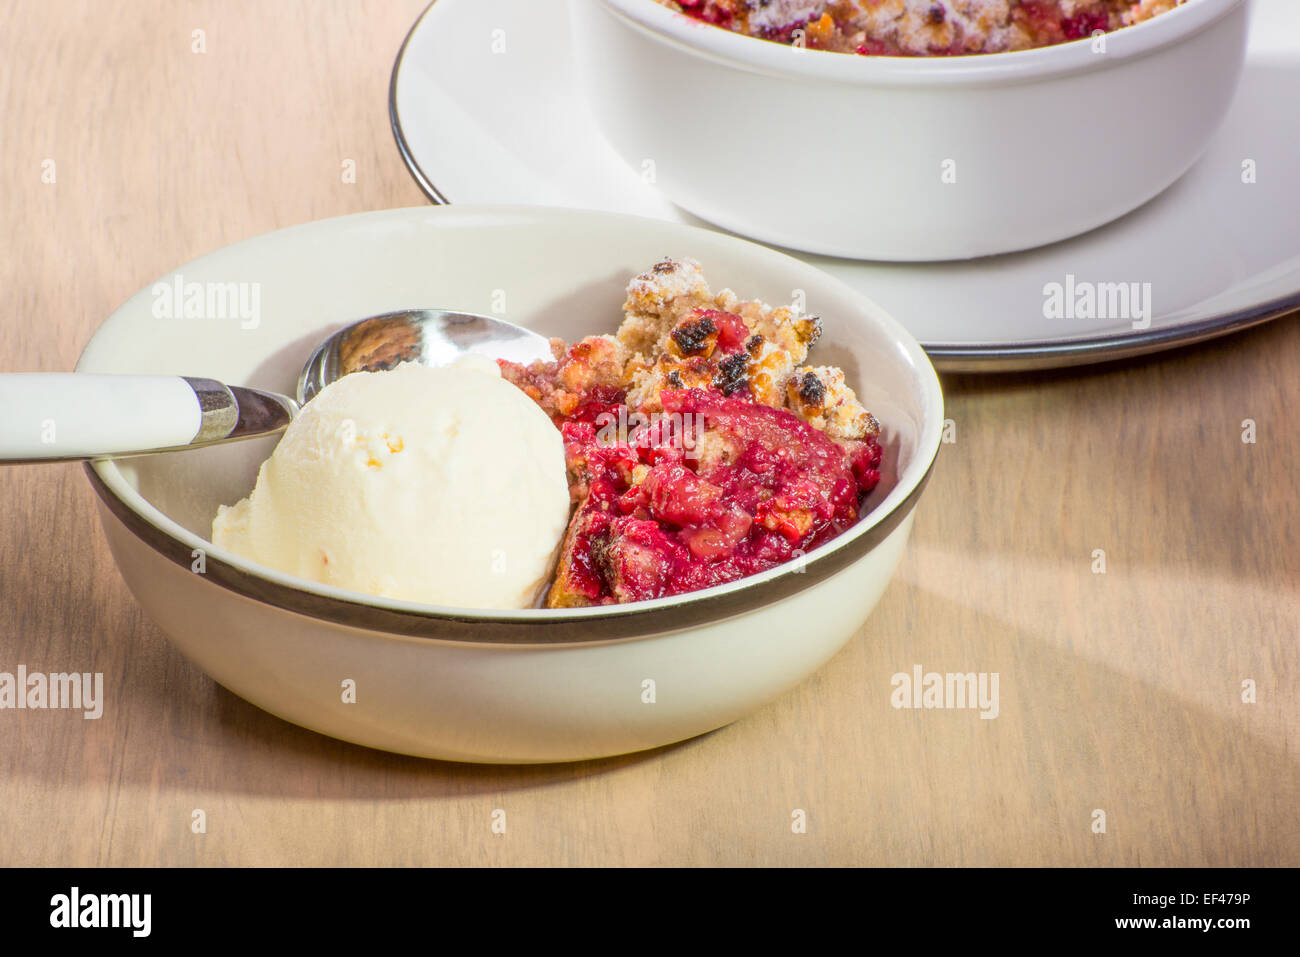 Freshly baked mixed berry crumble in a small dish, served with vanilla ice cream. Stock Photo